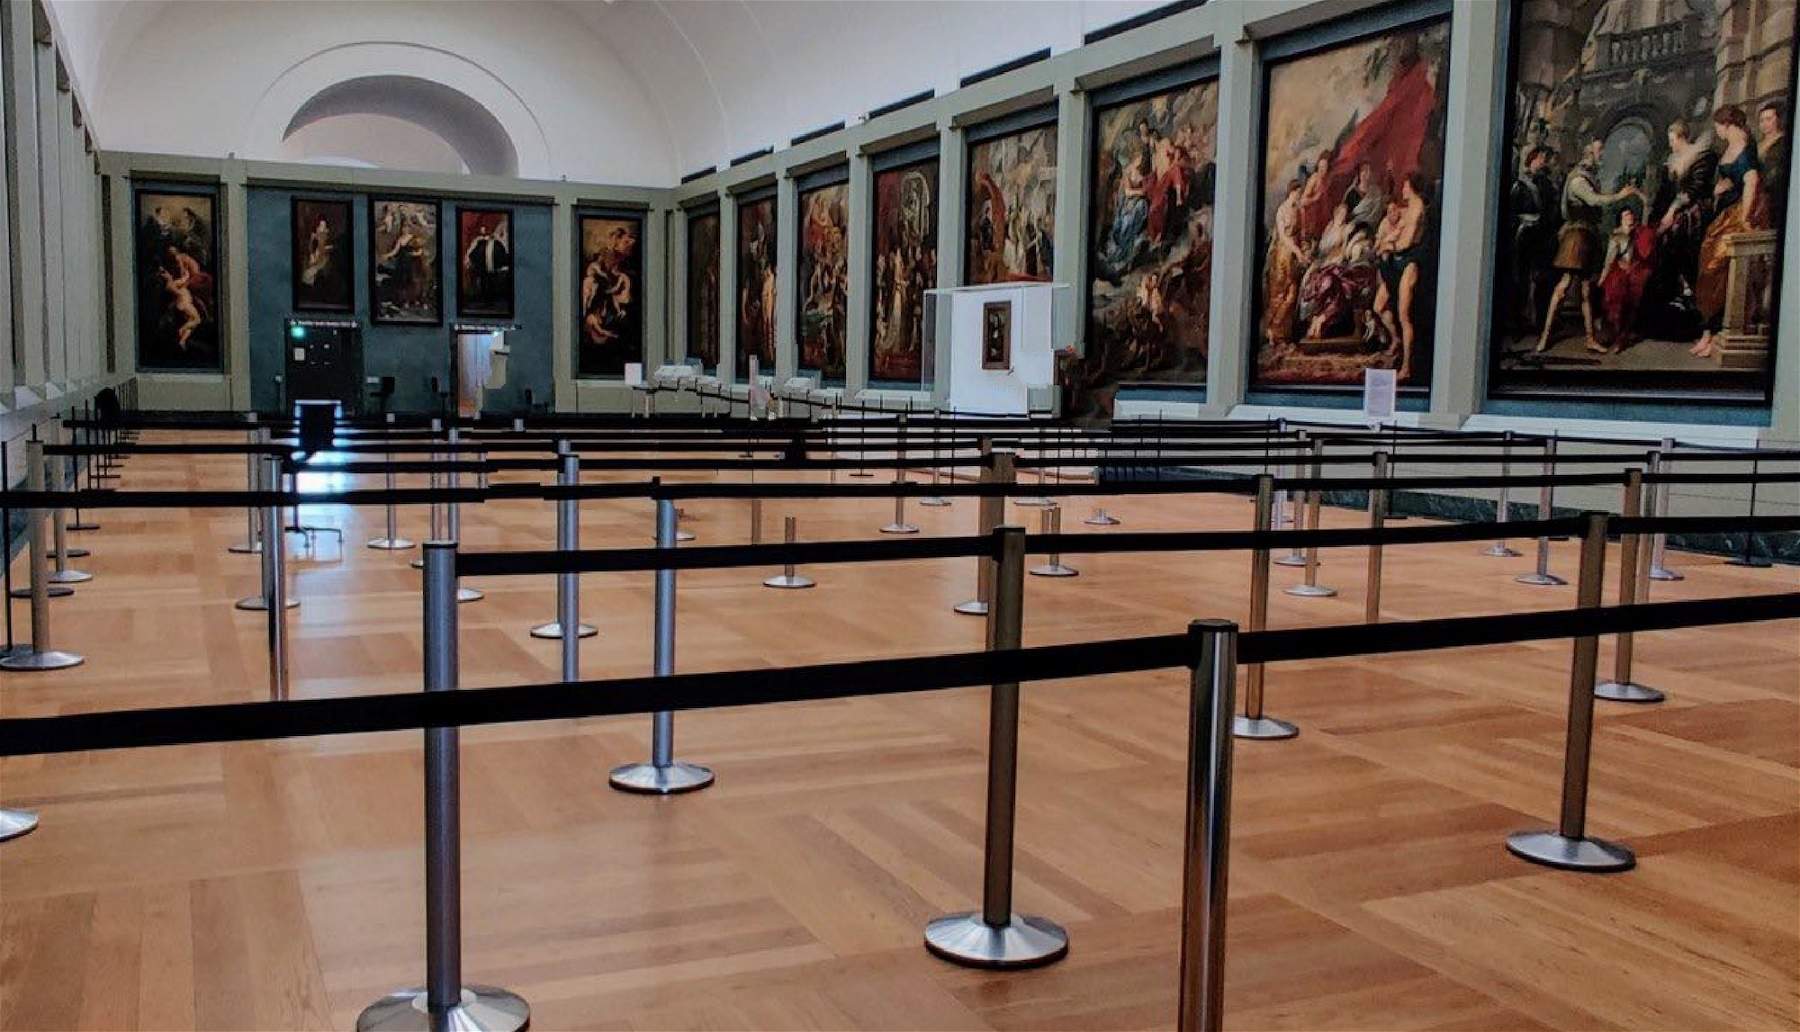 Louvre like Disneyland: queues to see the Mona Lisa take place in a transnational pathway. What about security? 